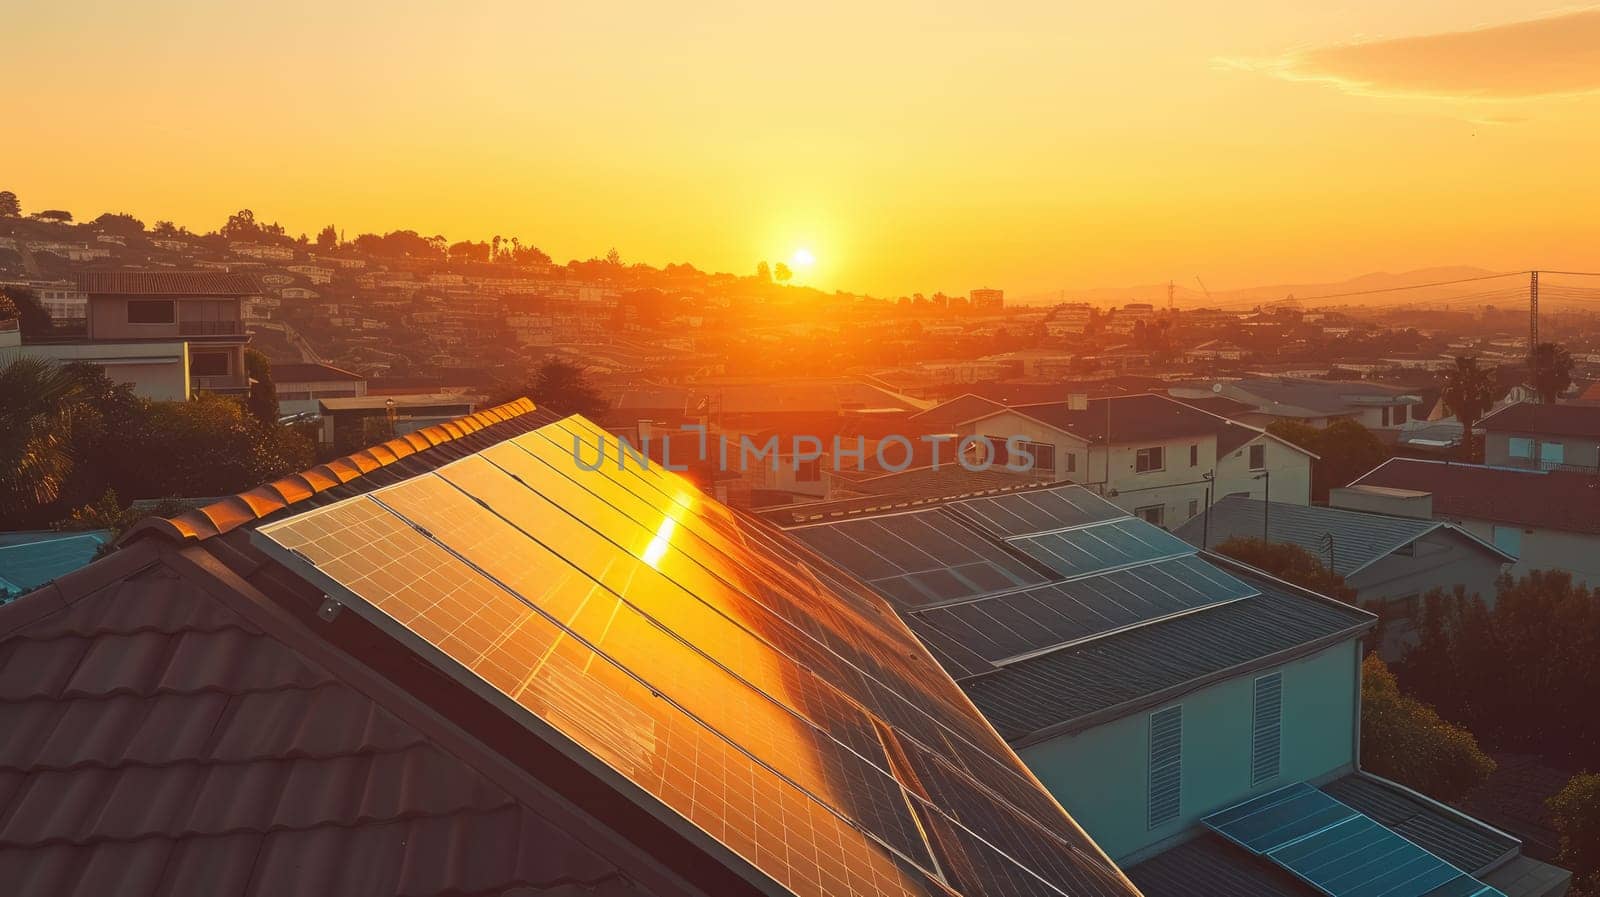 Residential Solar Panels at Sunset AIG41 by biancoblue